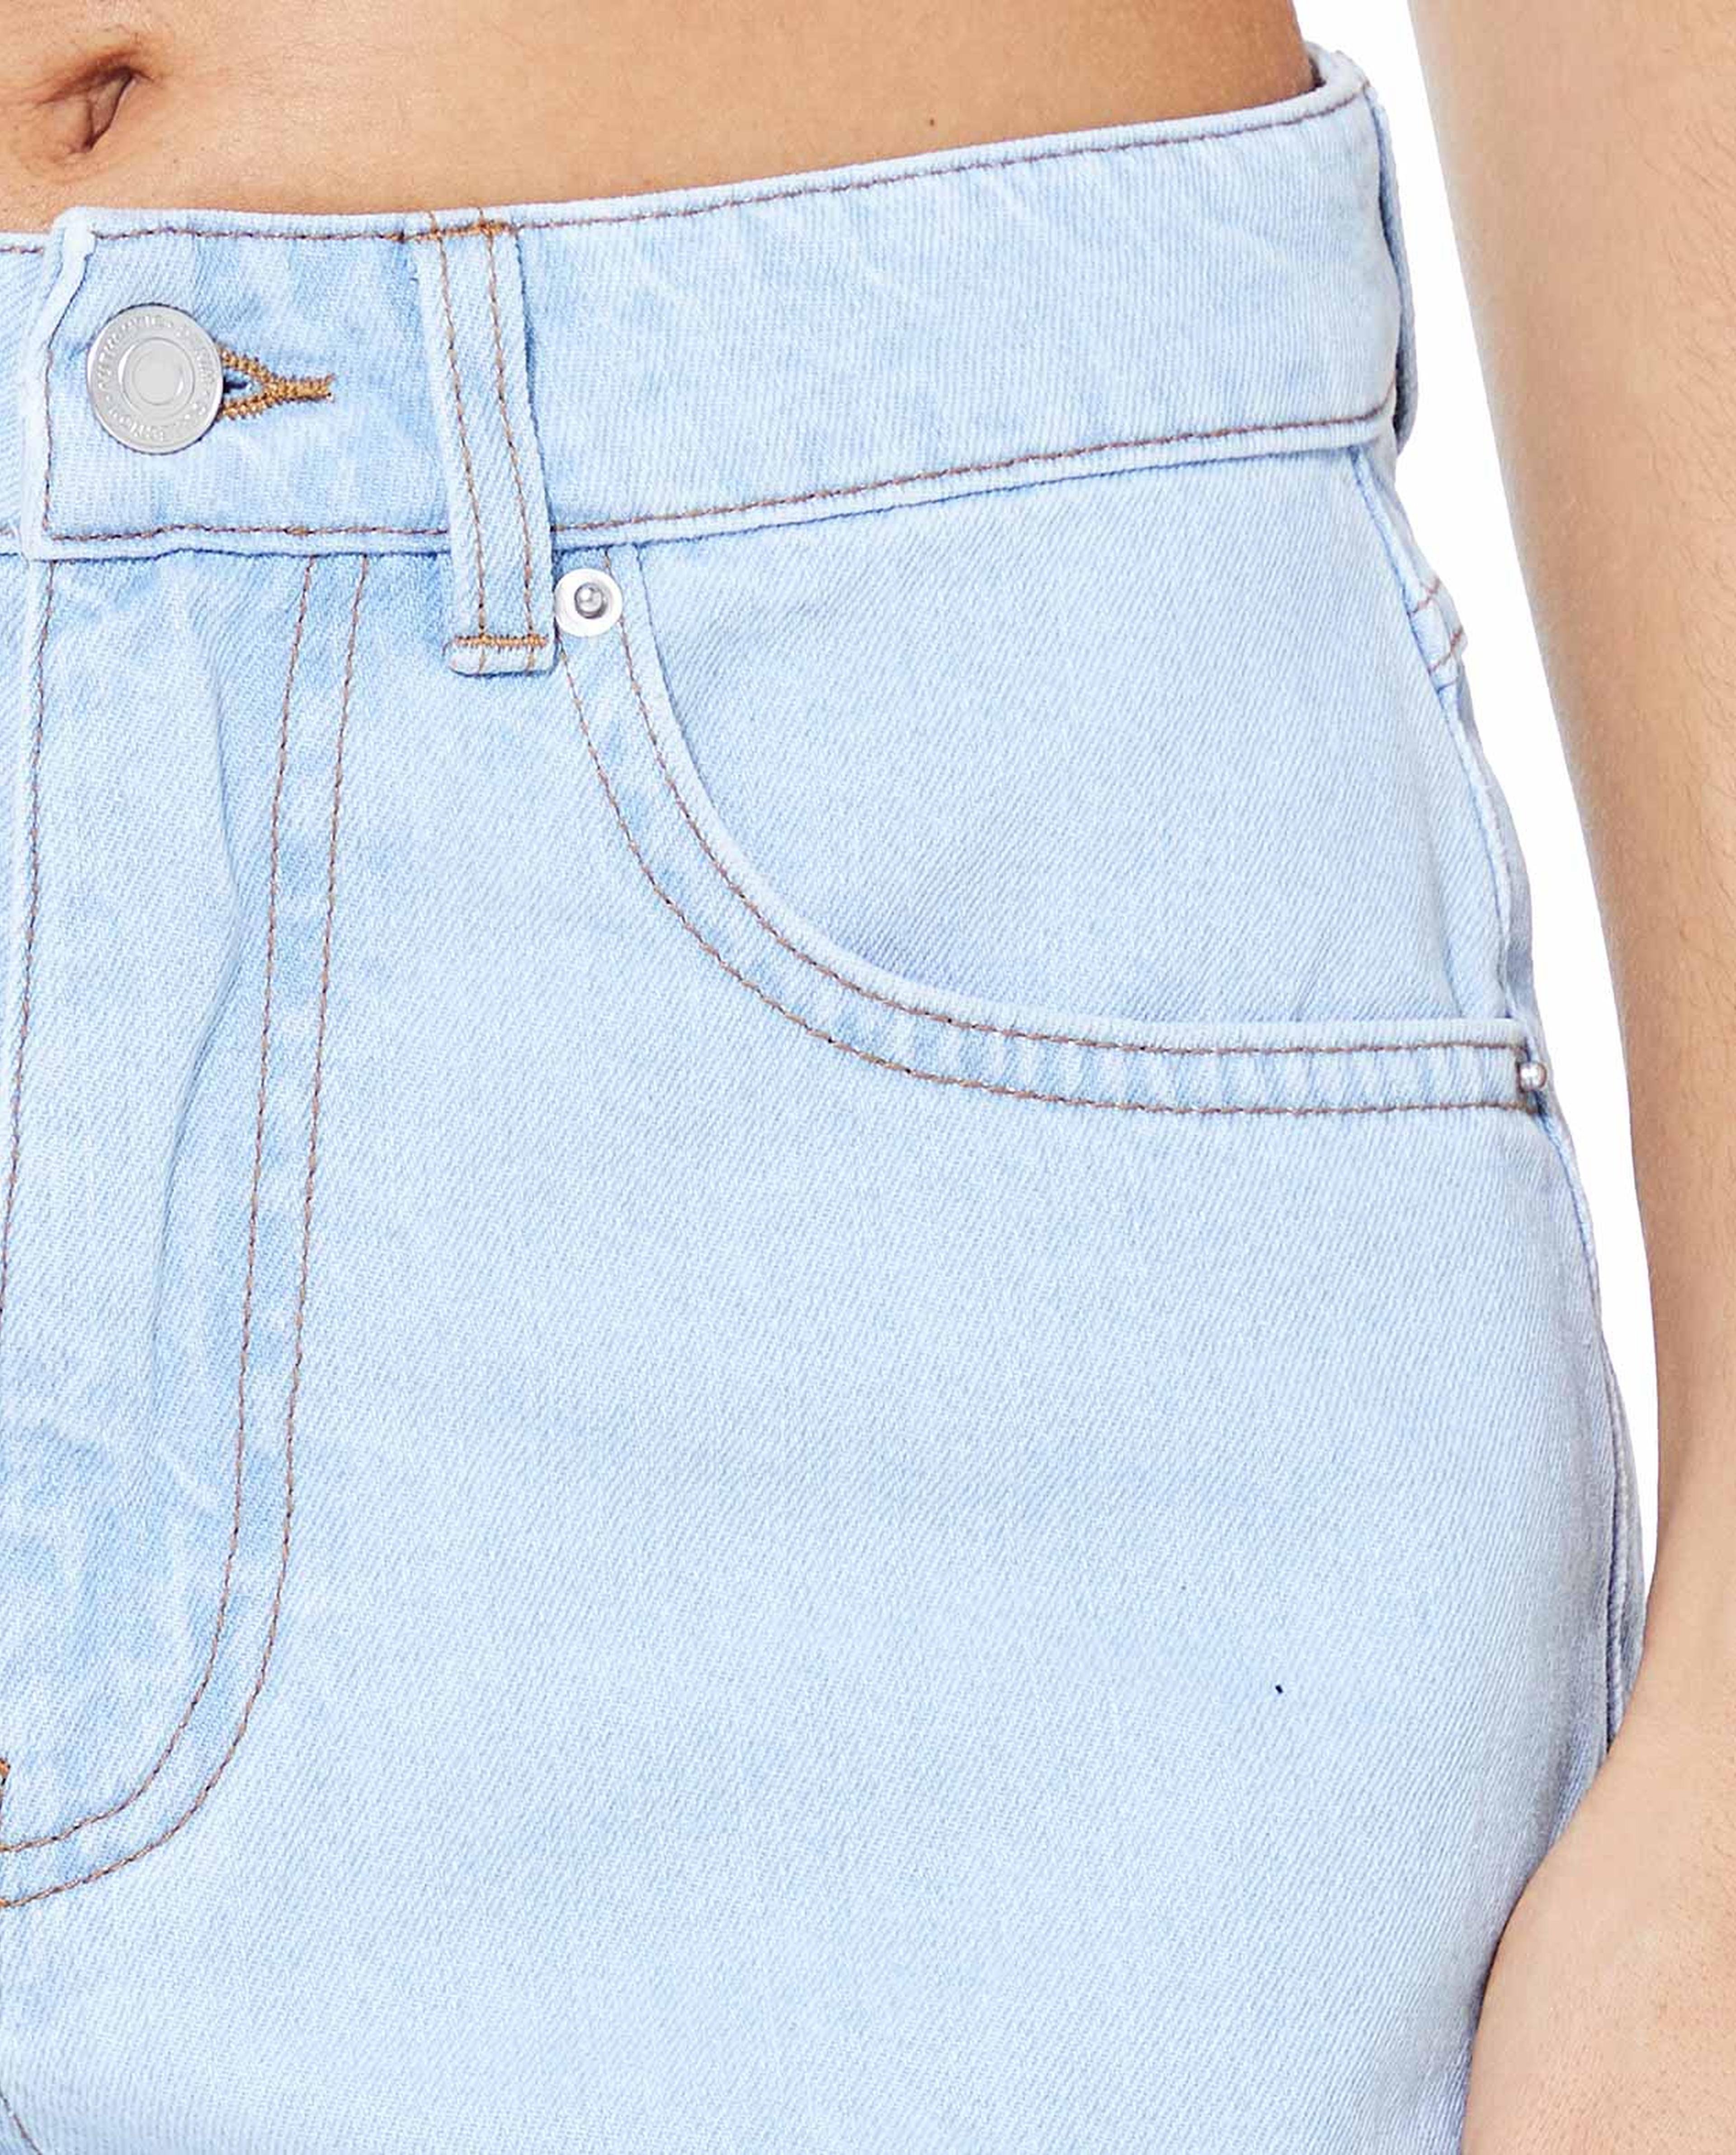 Denim Shorts with Button Closure